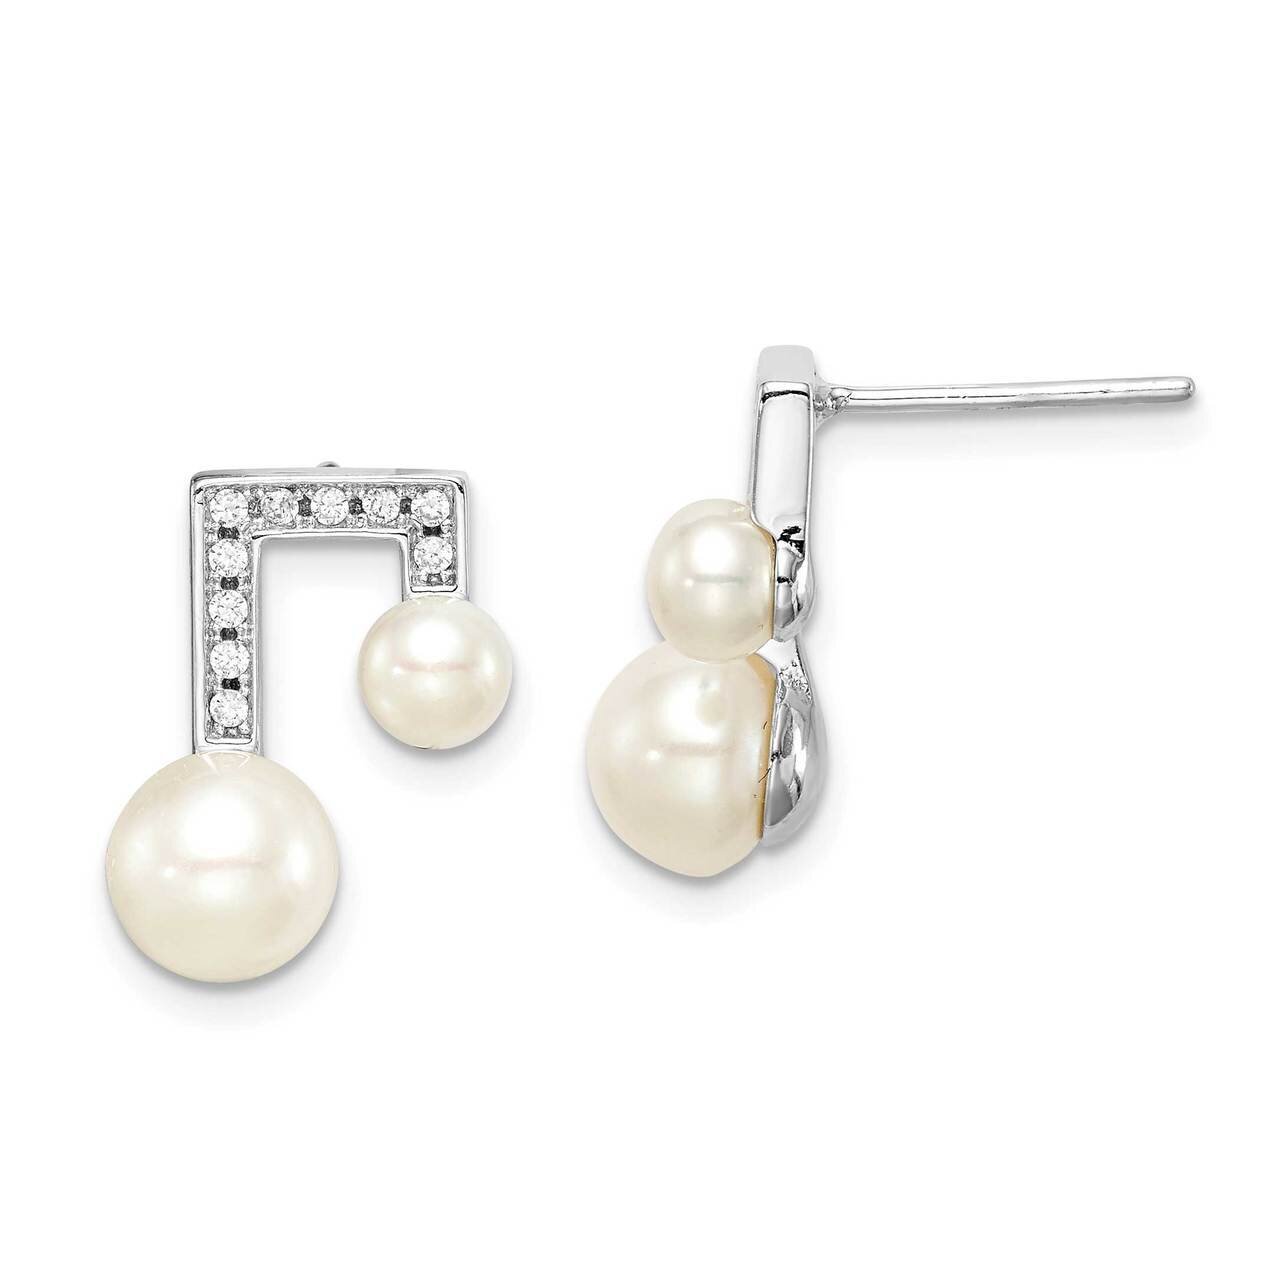 6-7mm White Button Freshwater Cultured Pearl CZ Diamond Earrings Sterling Silver Rhodium Plated QE15257